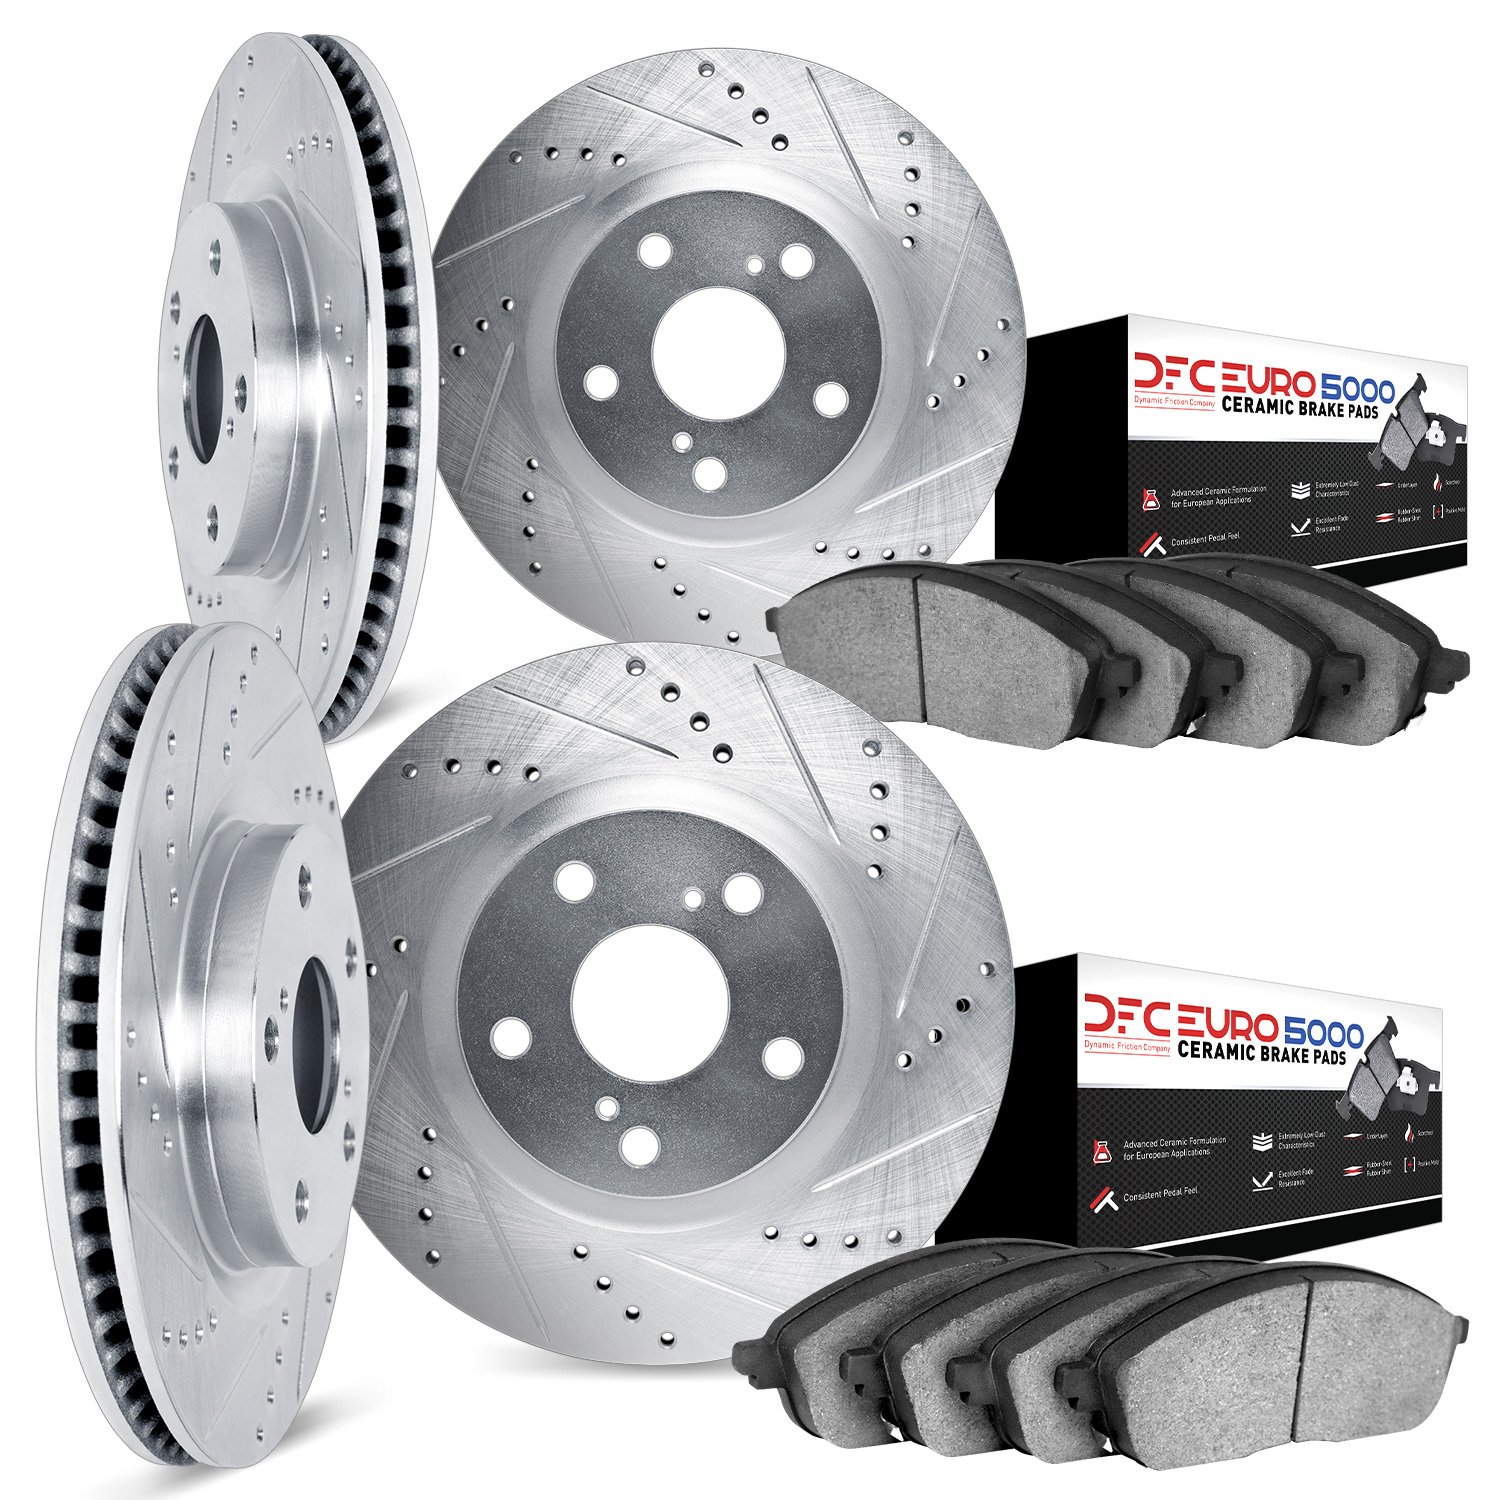 7604-31017 Drilled/Slotted Brake Rotors w/5000 Euro Ceramic Brake Pads Kit [Silver], 2006-2008 BMW, Position: Front and Rear